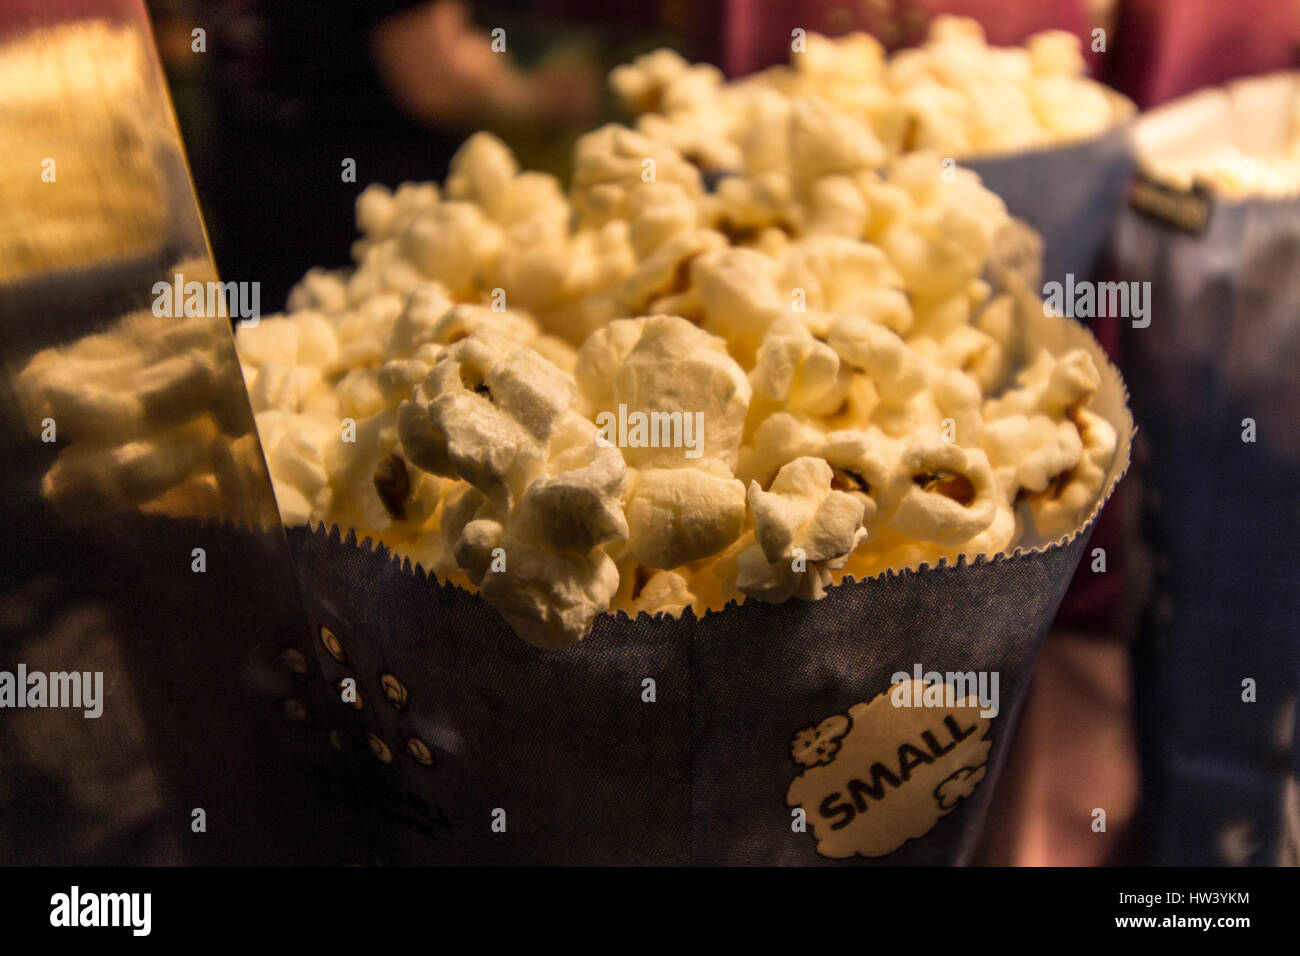 CARDIFF, UNITED KINGDOM. A small popcorn sold at Cineworld, all freshly popped on site. Stock Photo